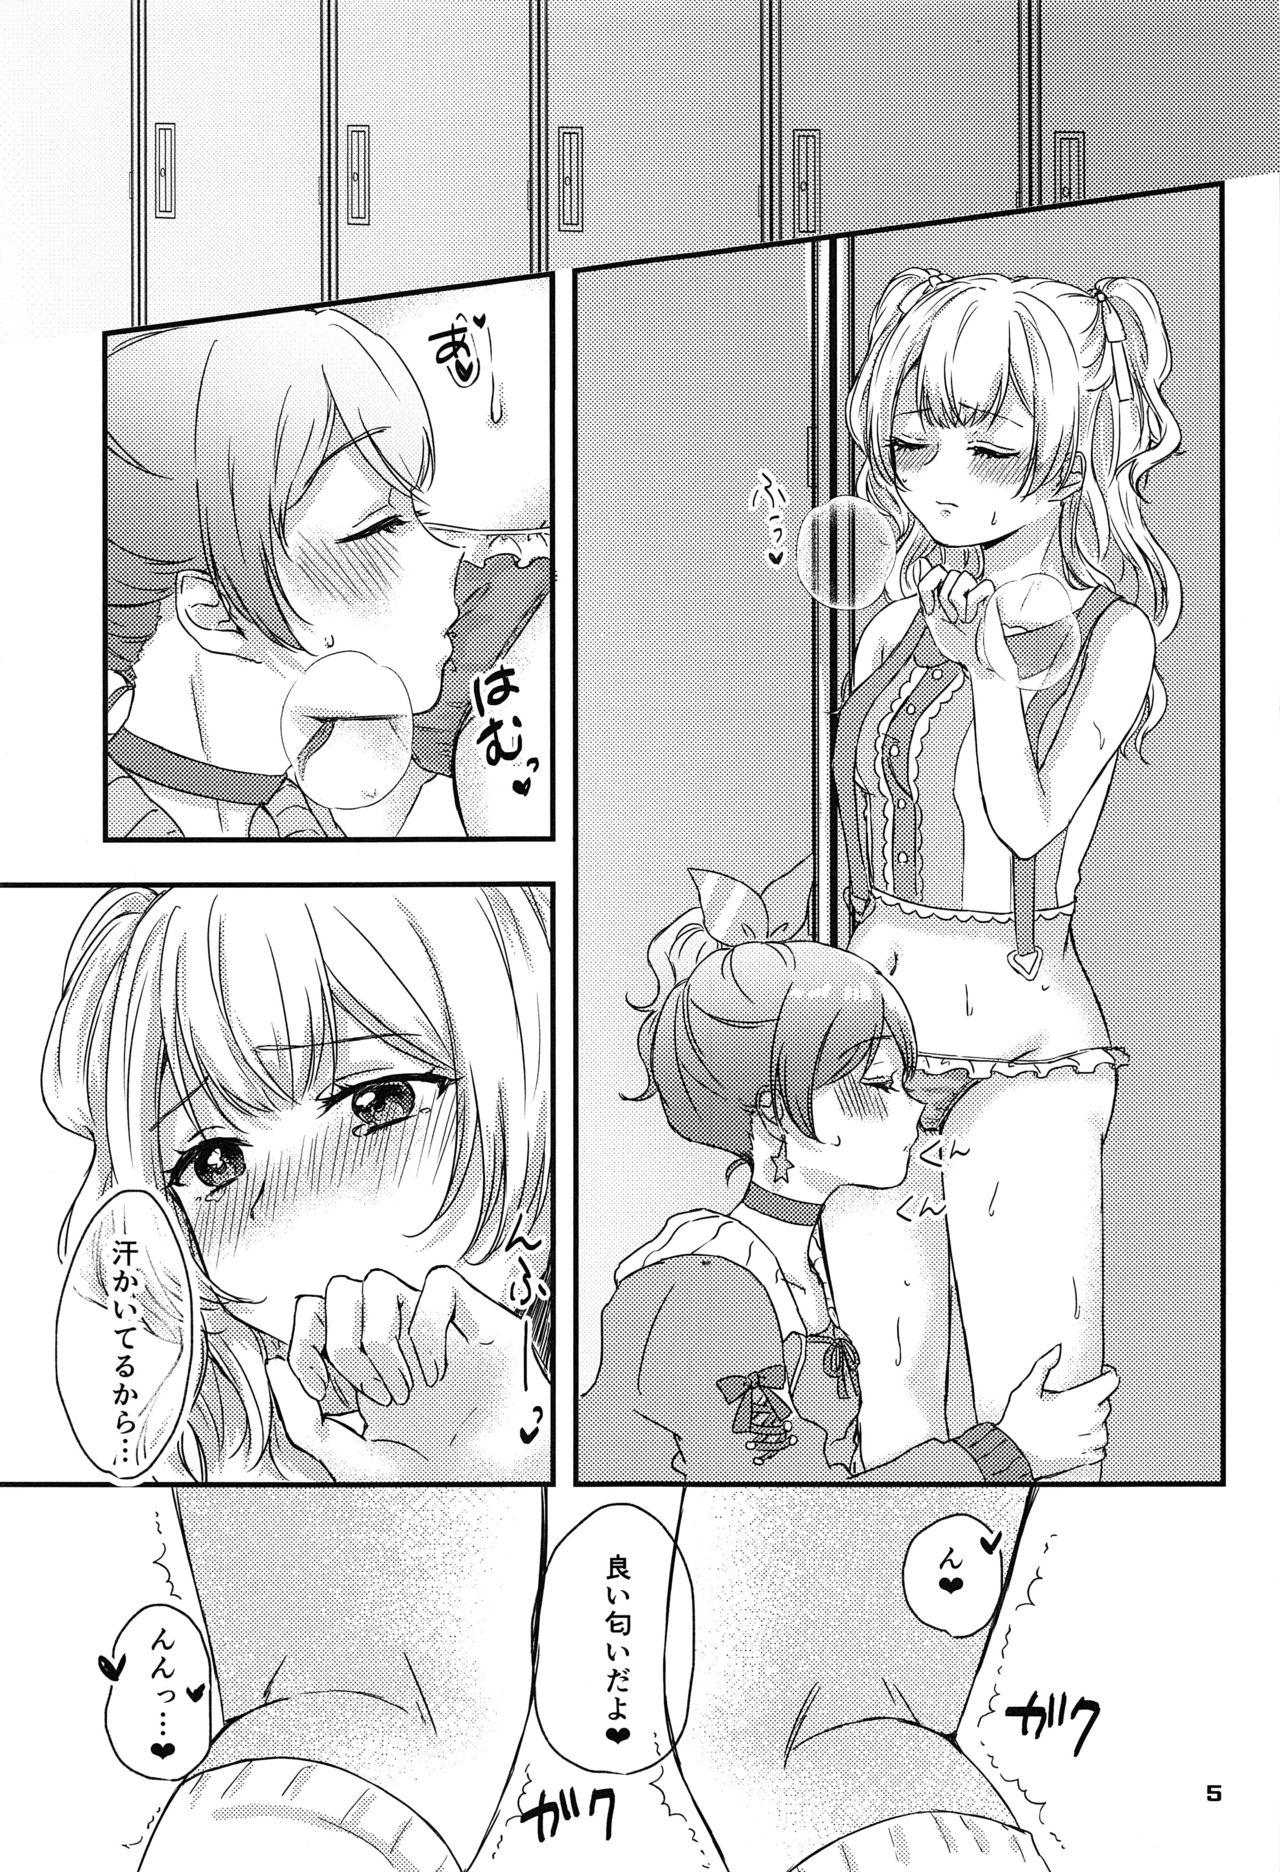 Party Sweet Costume Sex time. - Bang dream Shemales - Page 3